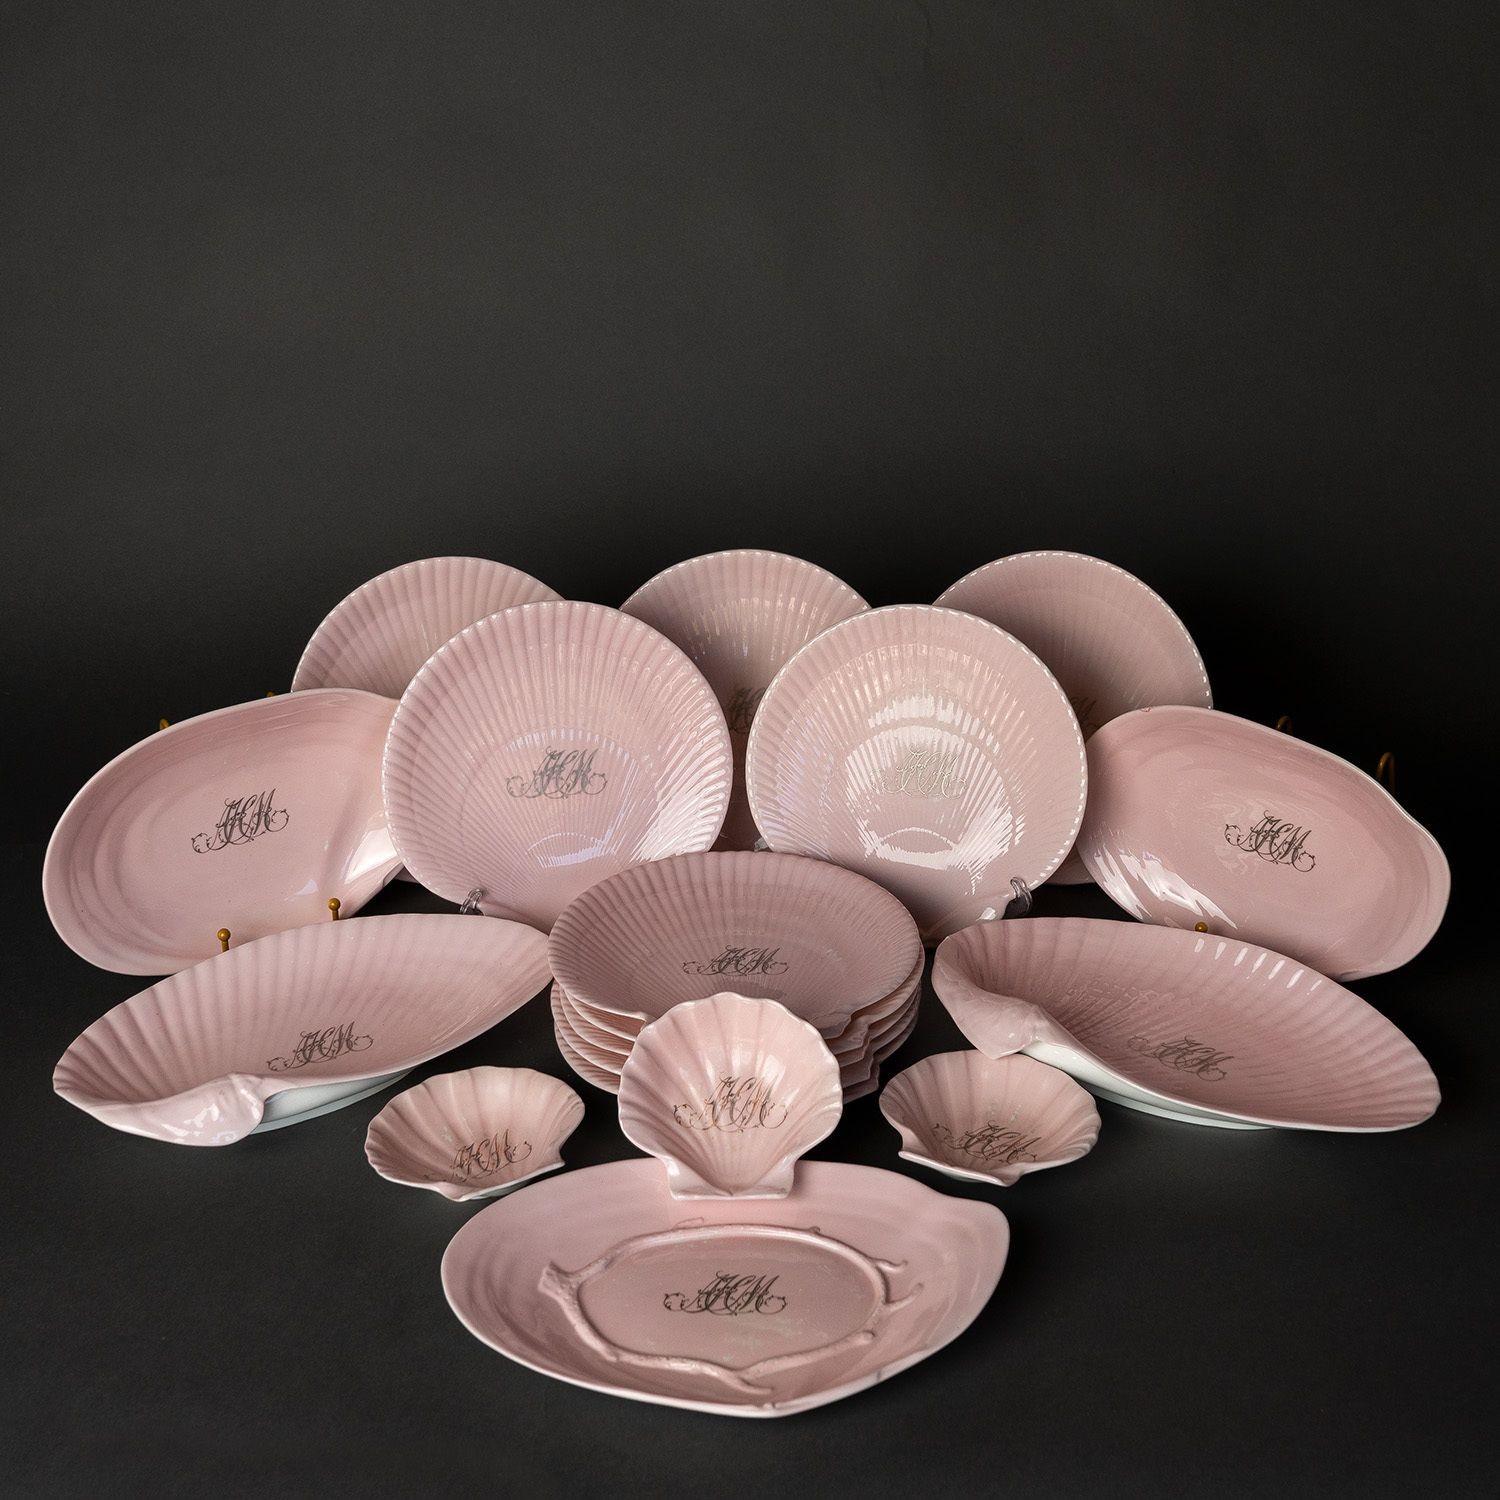 Antique Victorian Shell Shaped Dishes and Plates

Dating from 1884 this service would have been a bespoke order commissioned through John Mortlock’s upmarket Oxford Street store. In the 18th and 19th centuries, Mortlock’s was the most important